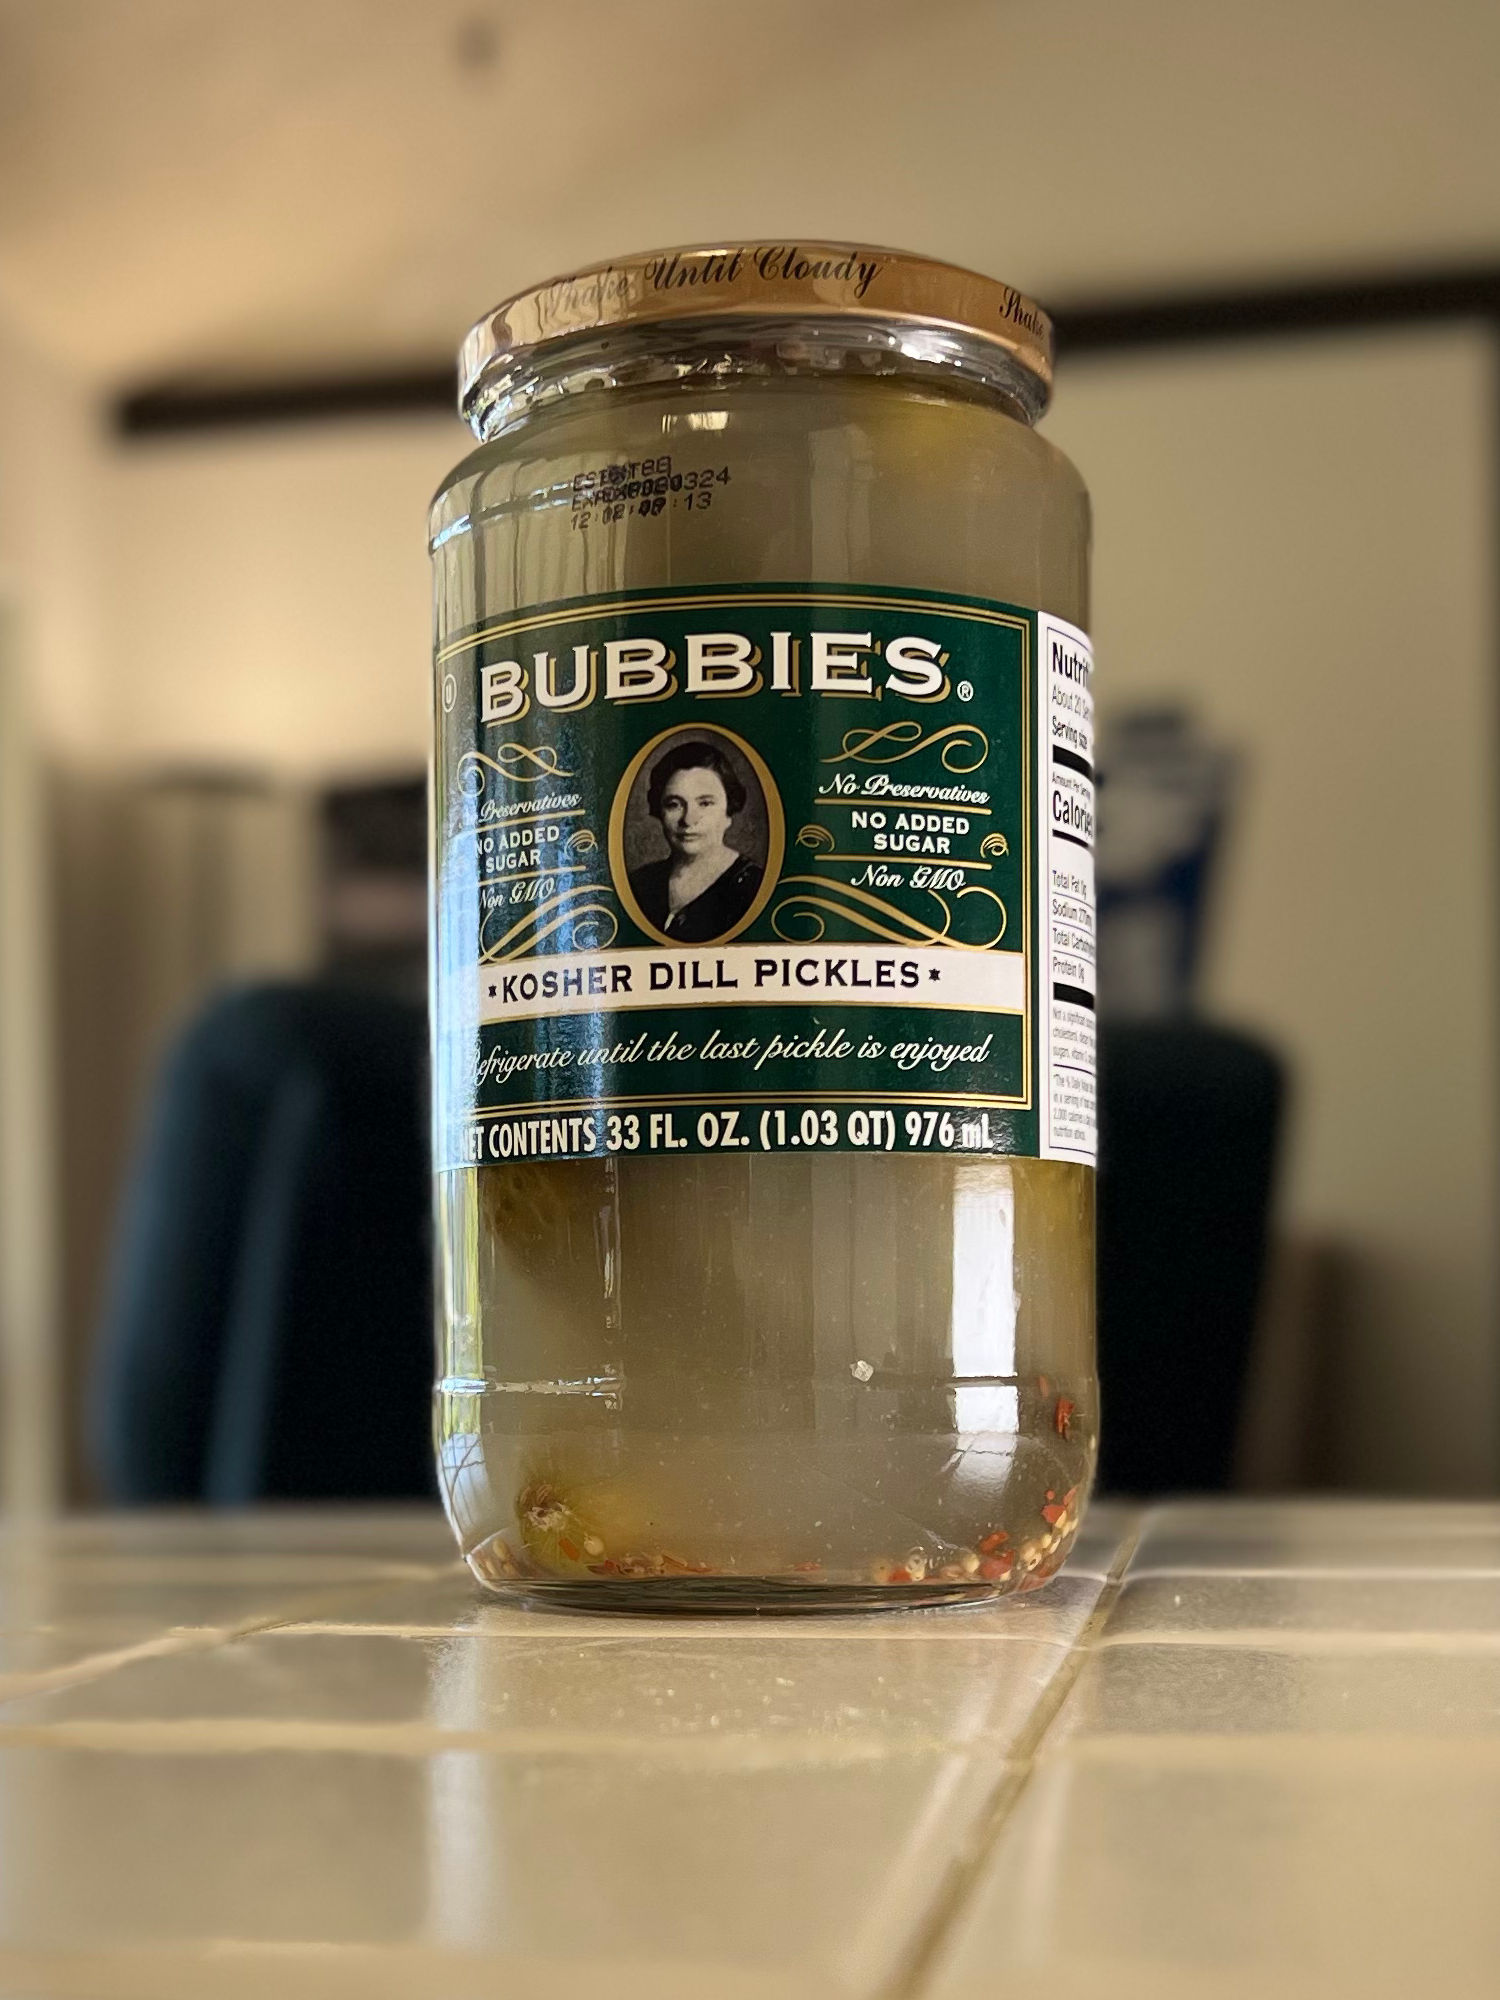 Kosher Dill Pickles Bubbies